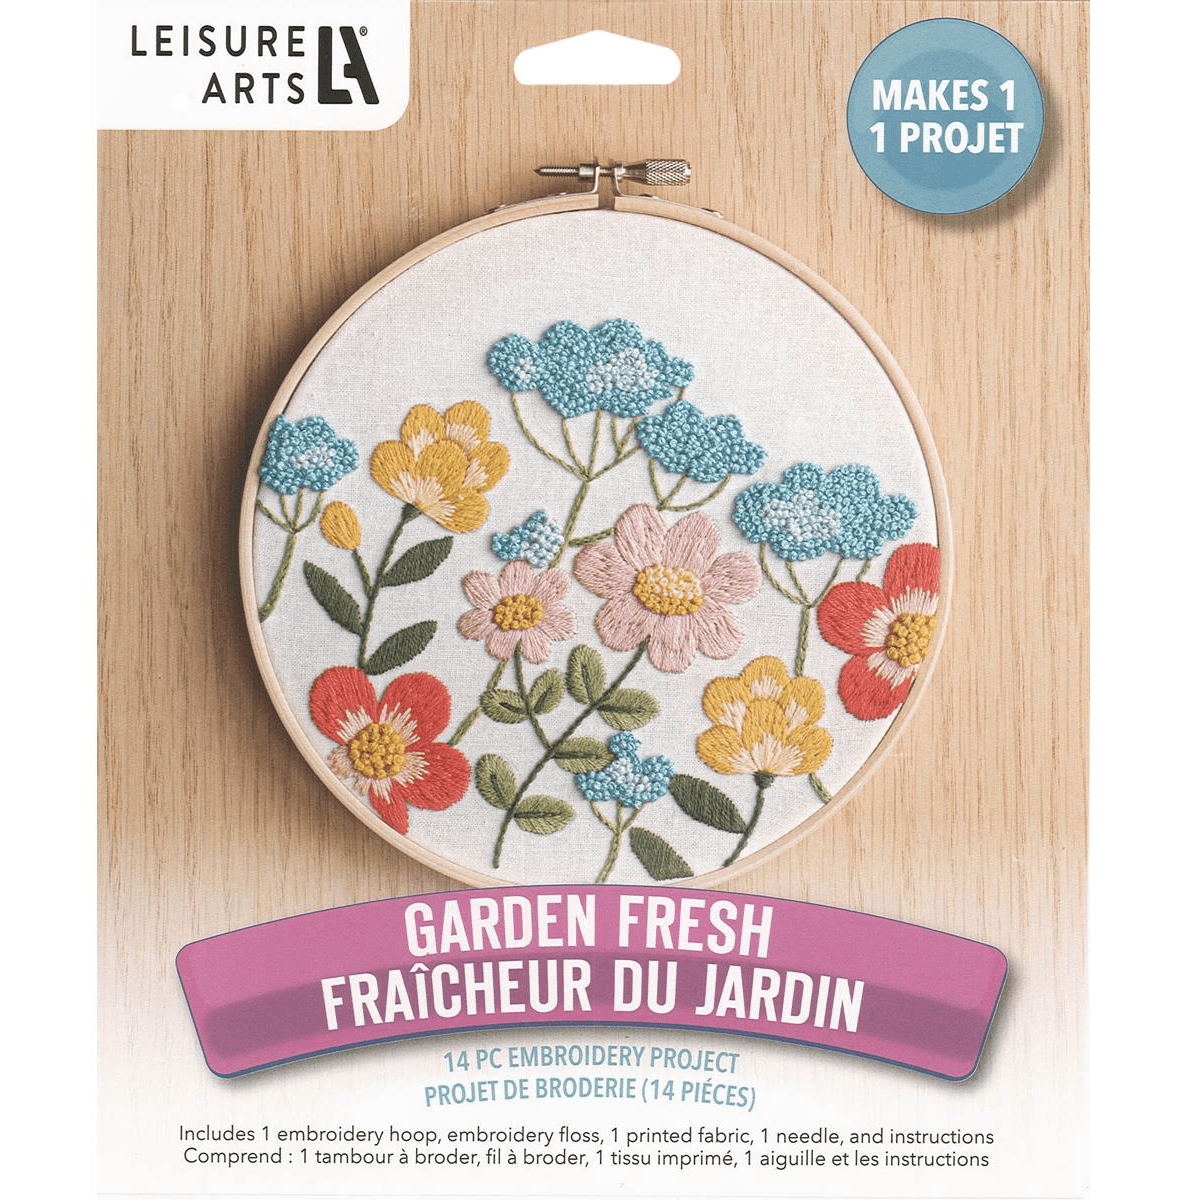 Leisure Arts Embroidery Kit 6 Springtime - embroidery kit for beginners - embroidery  kit for adults - cross stitch kits - cross stitch kits for beginners - embroidery  patterns